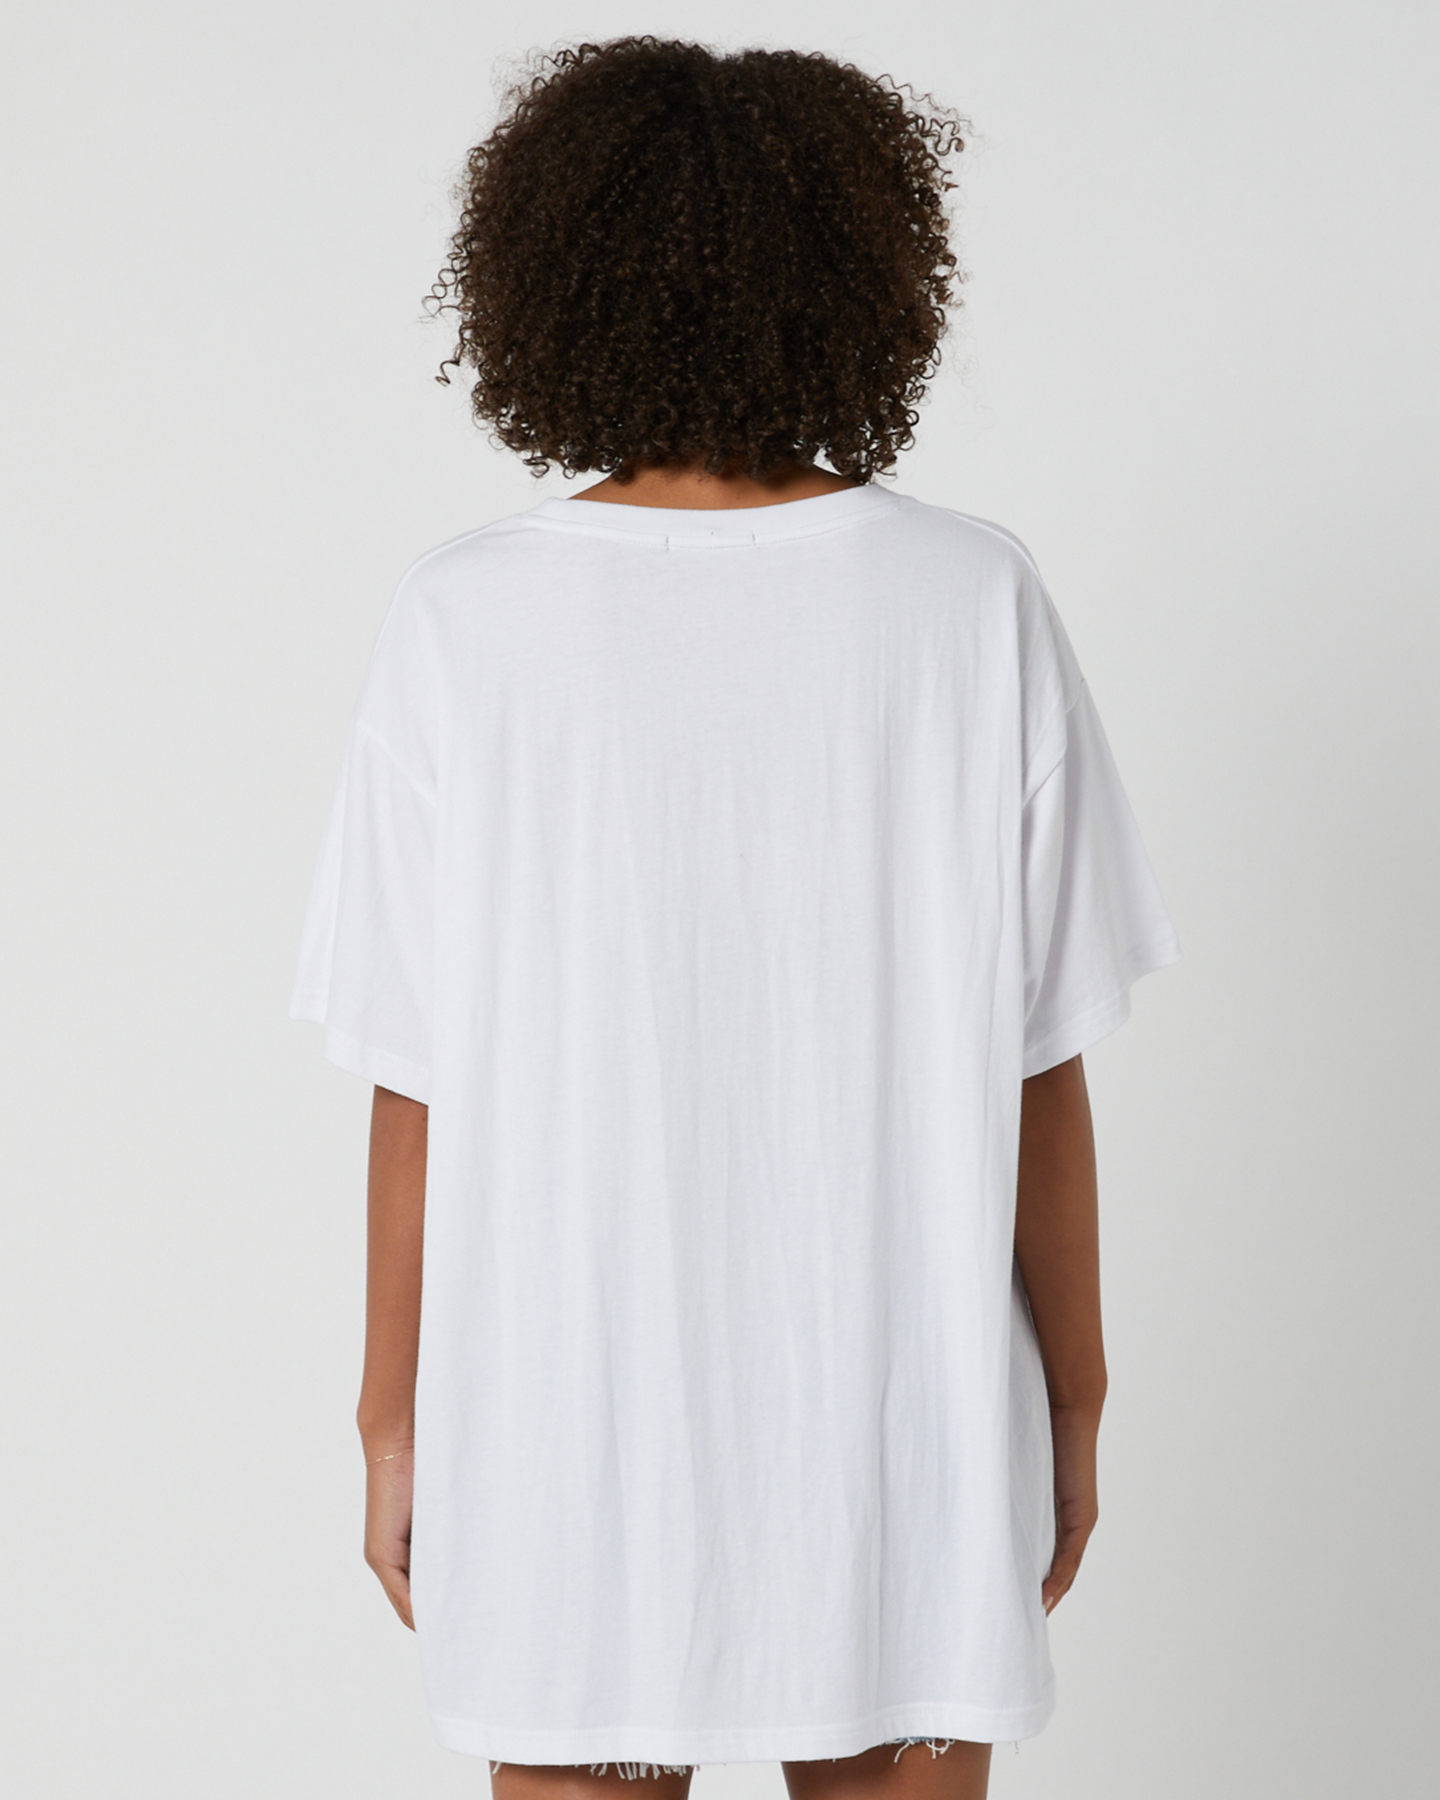 All About Eve Destination Tee - White | SurfStitch